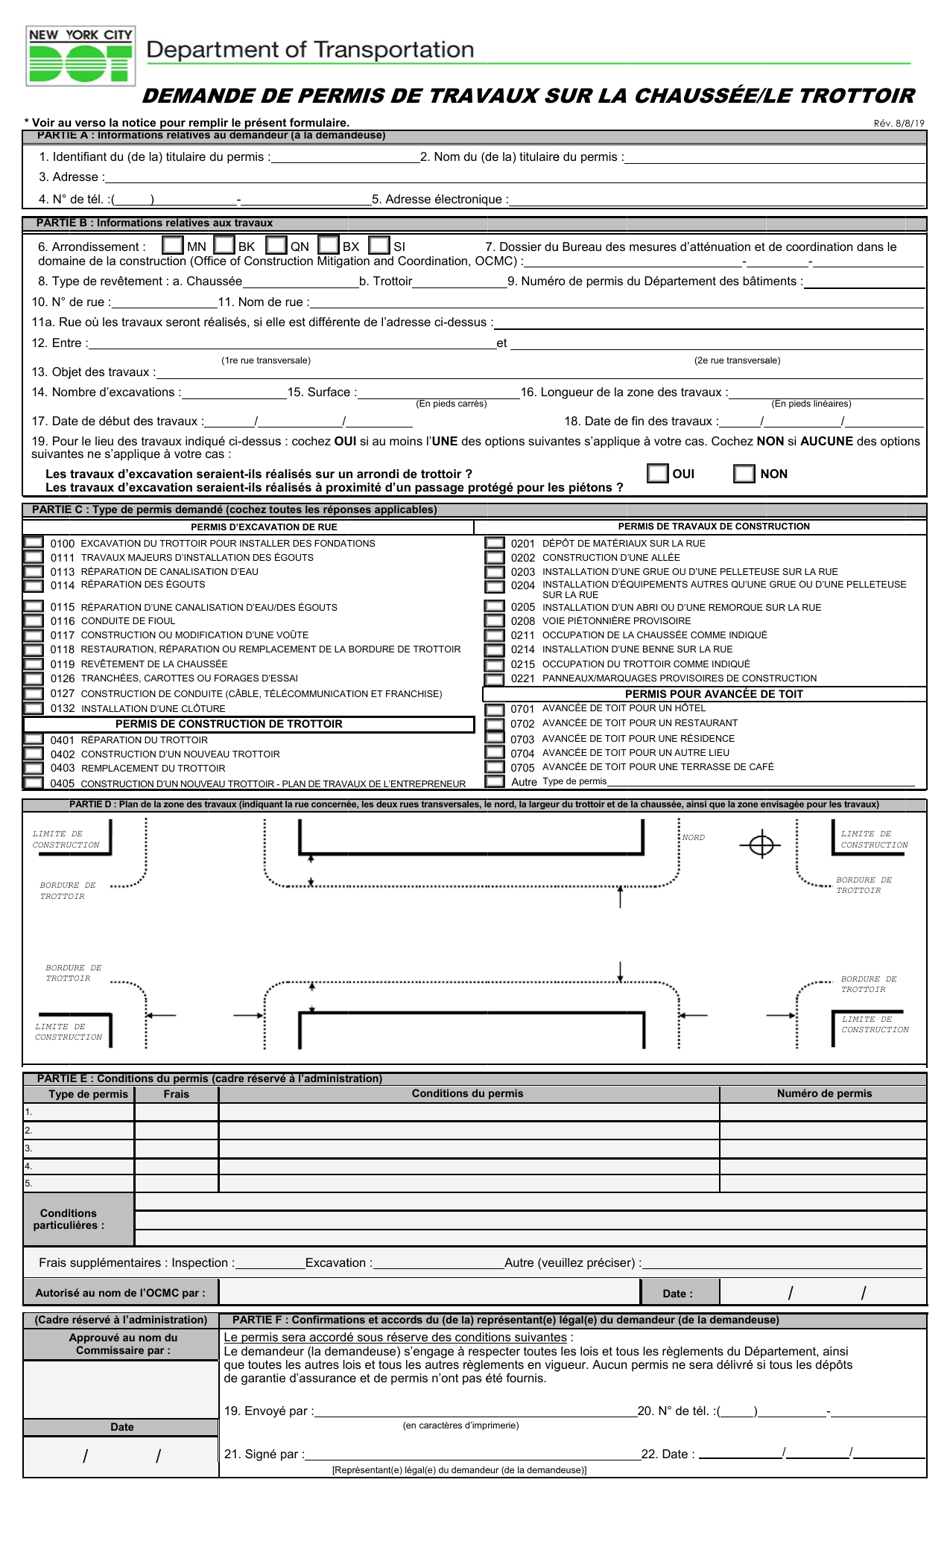 Application for Roadway / Sidewalk Permit(S) - New York City (French), Page 1